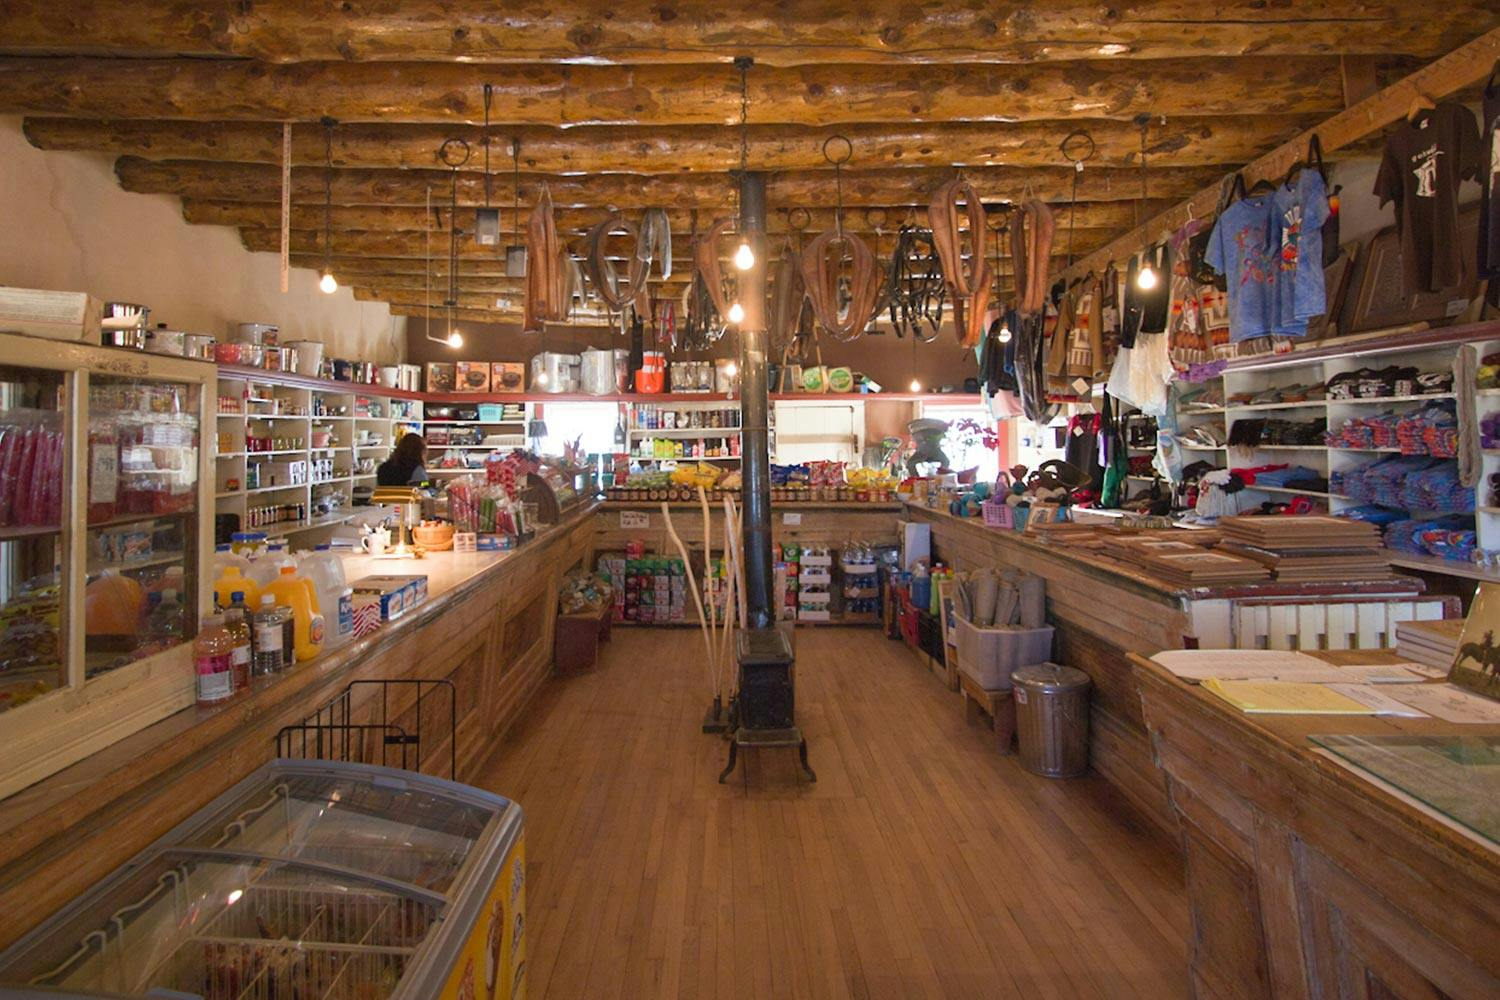 Interior of a trading post. Leather goods hang from log rafters. Souvenir shelves and a wooden counter wrap around the room.